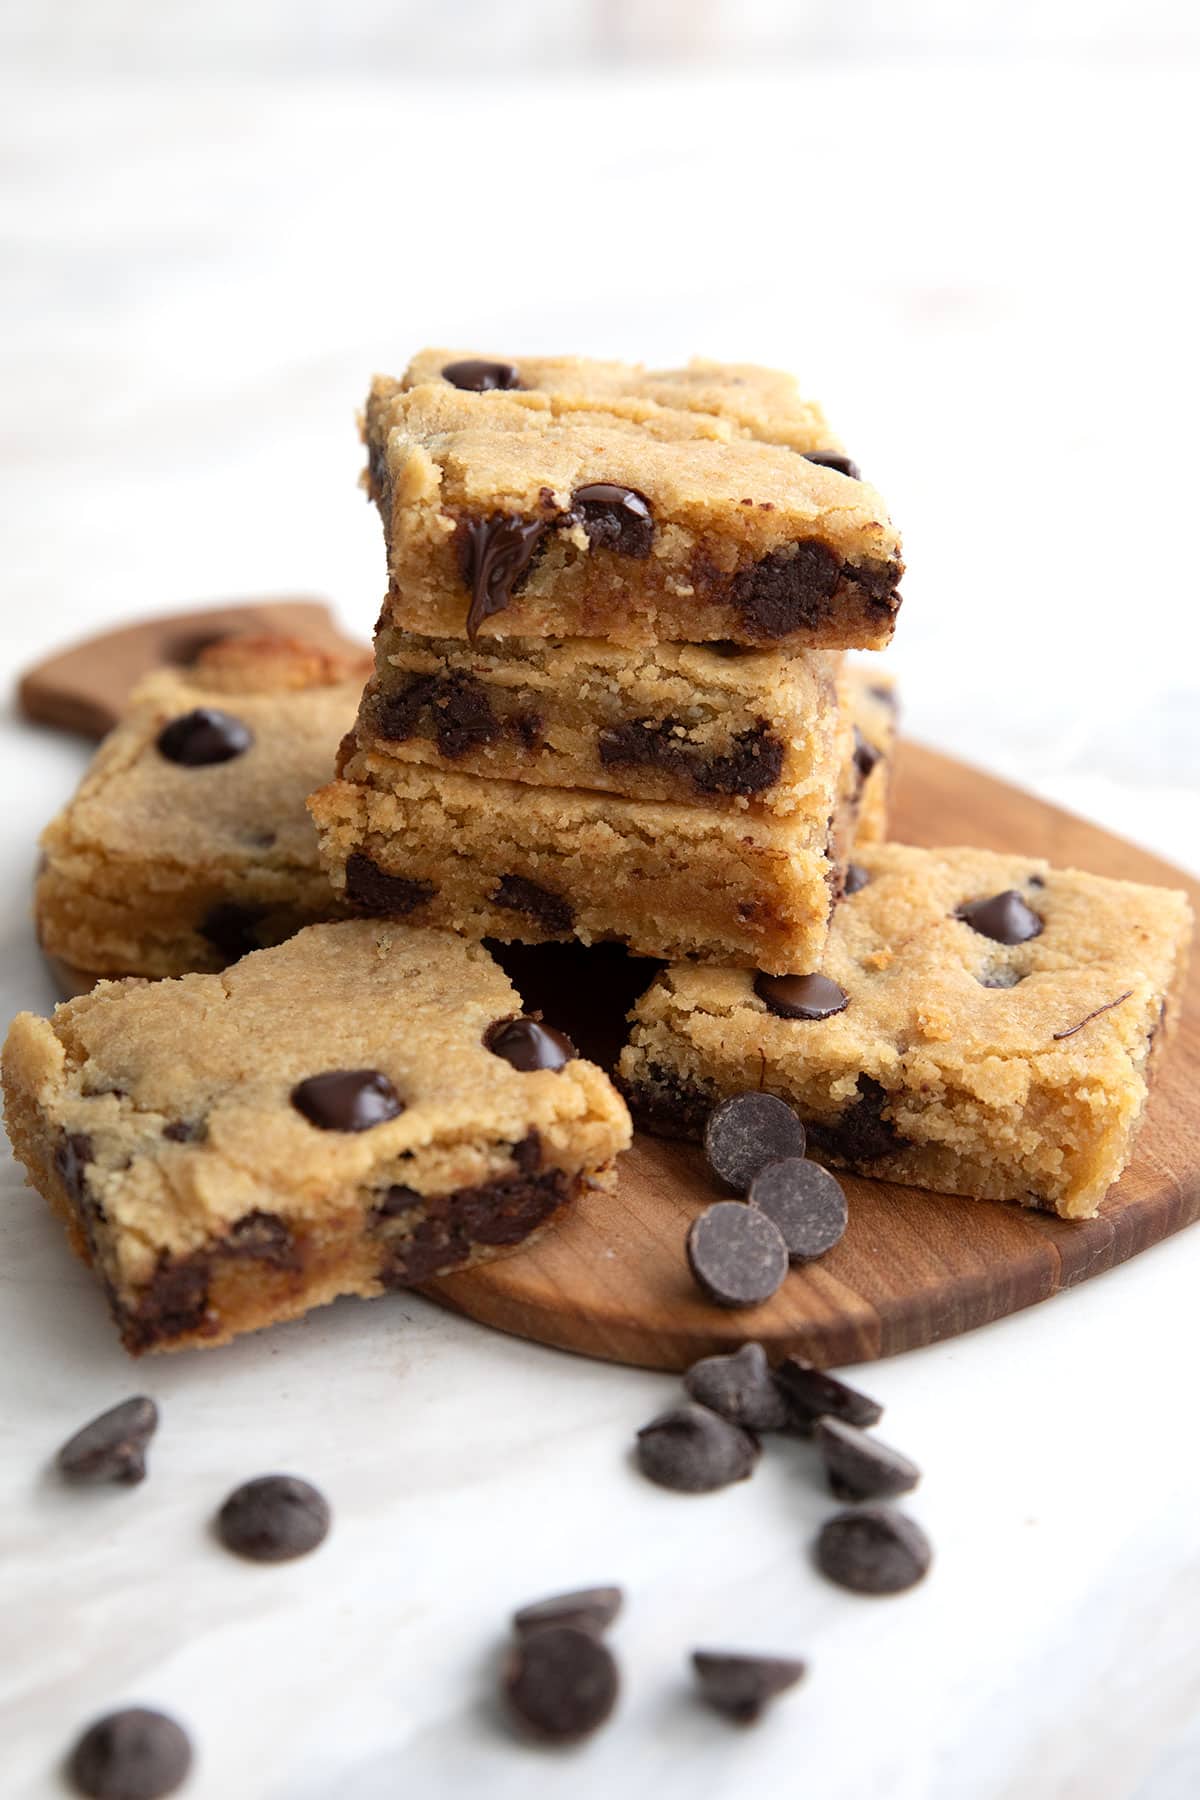 A stack of Brown Butter Keto Blondies on a wooden cutting board with chocolate chips strewn around.